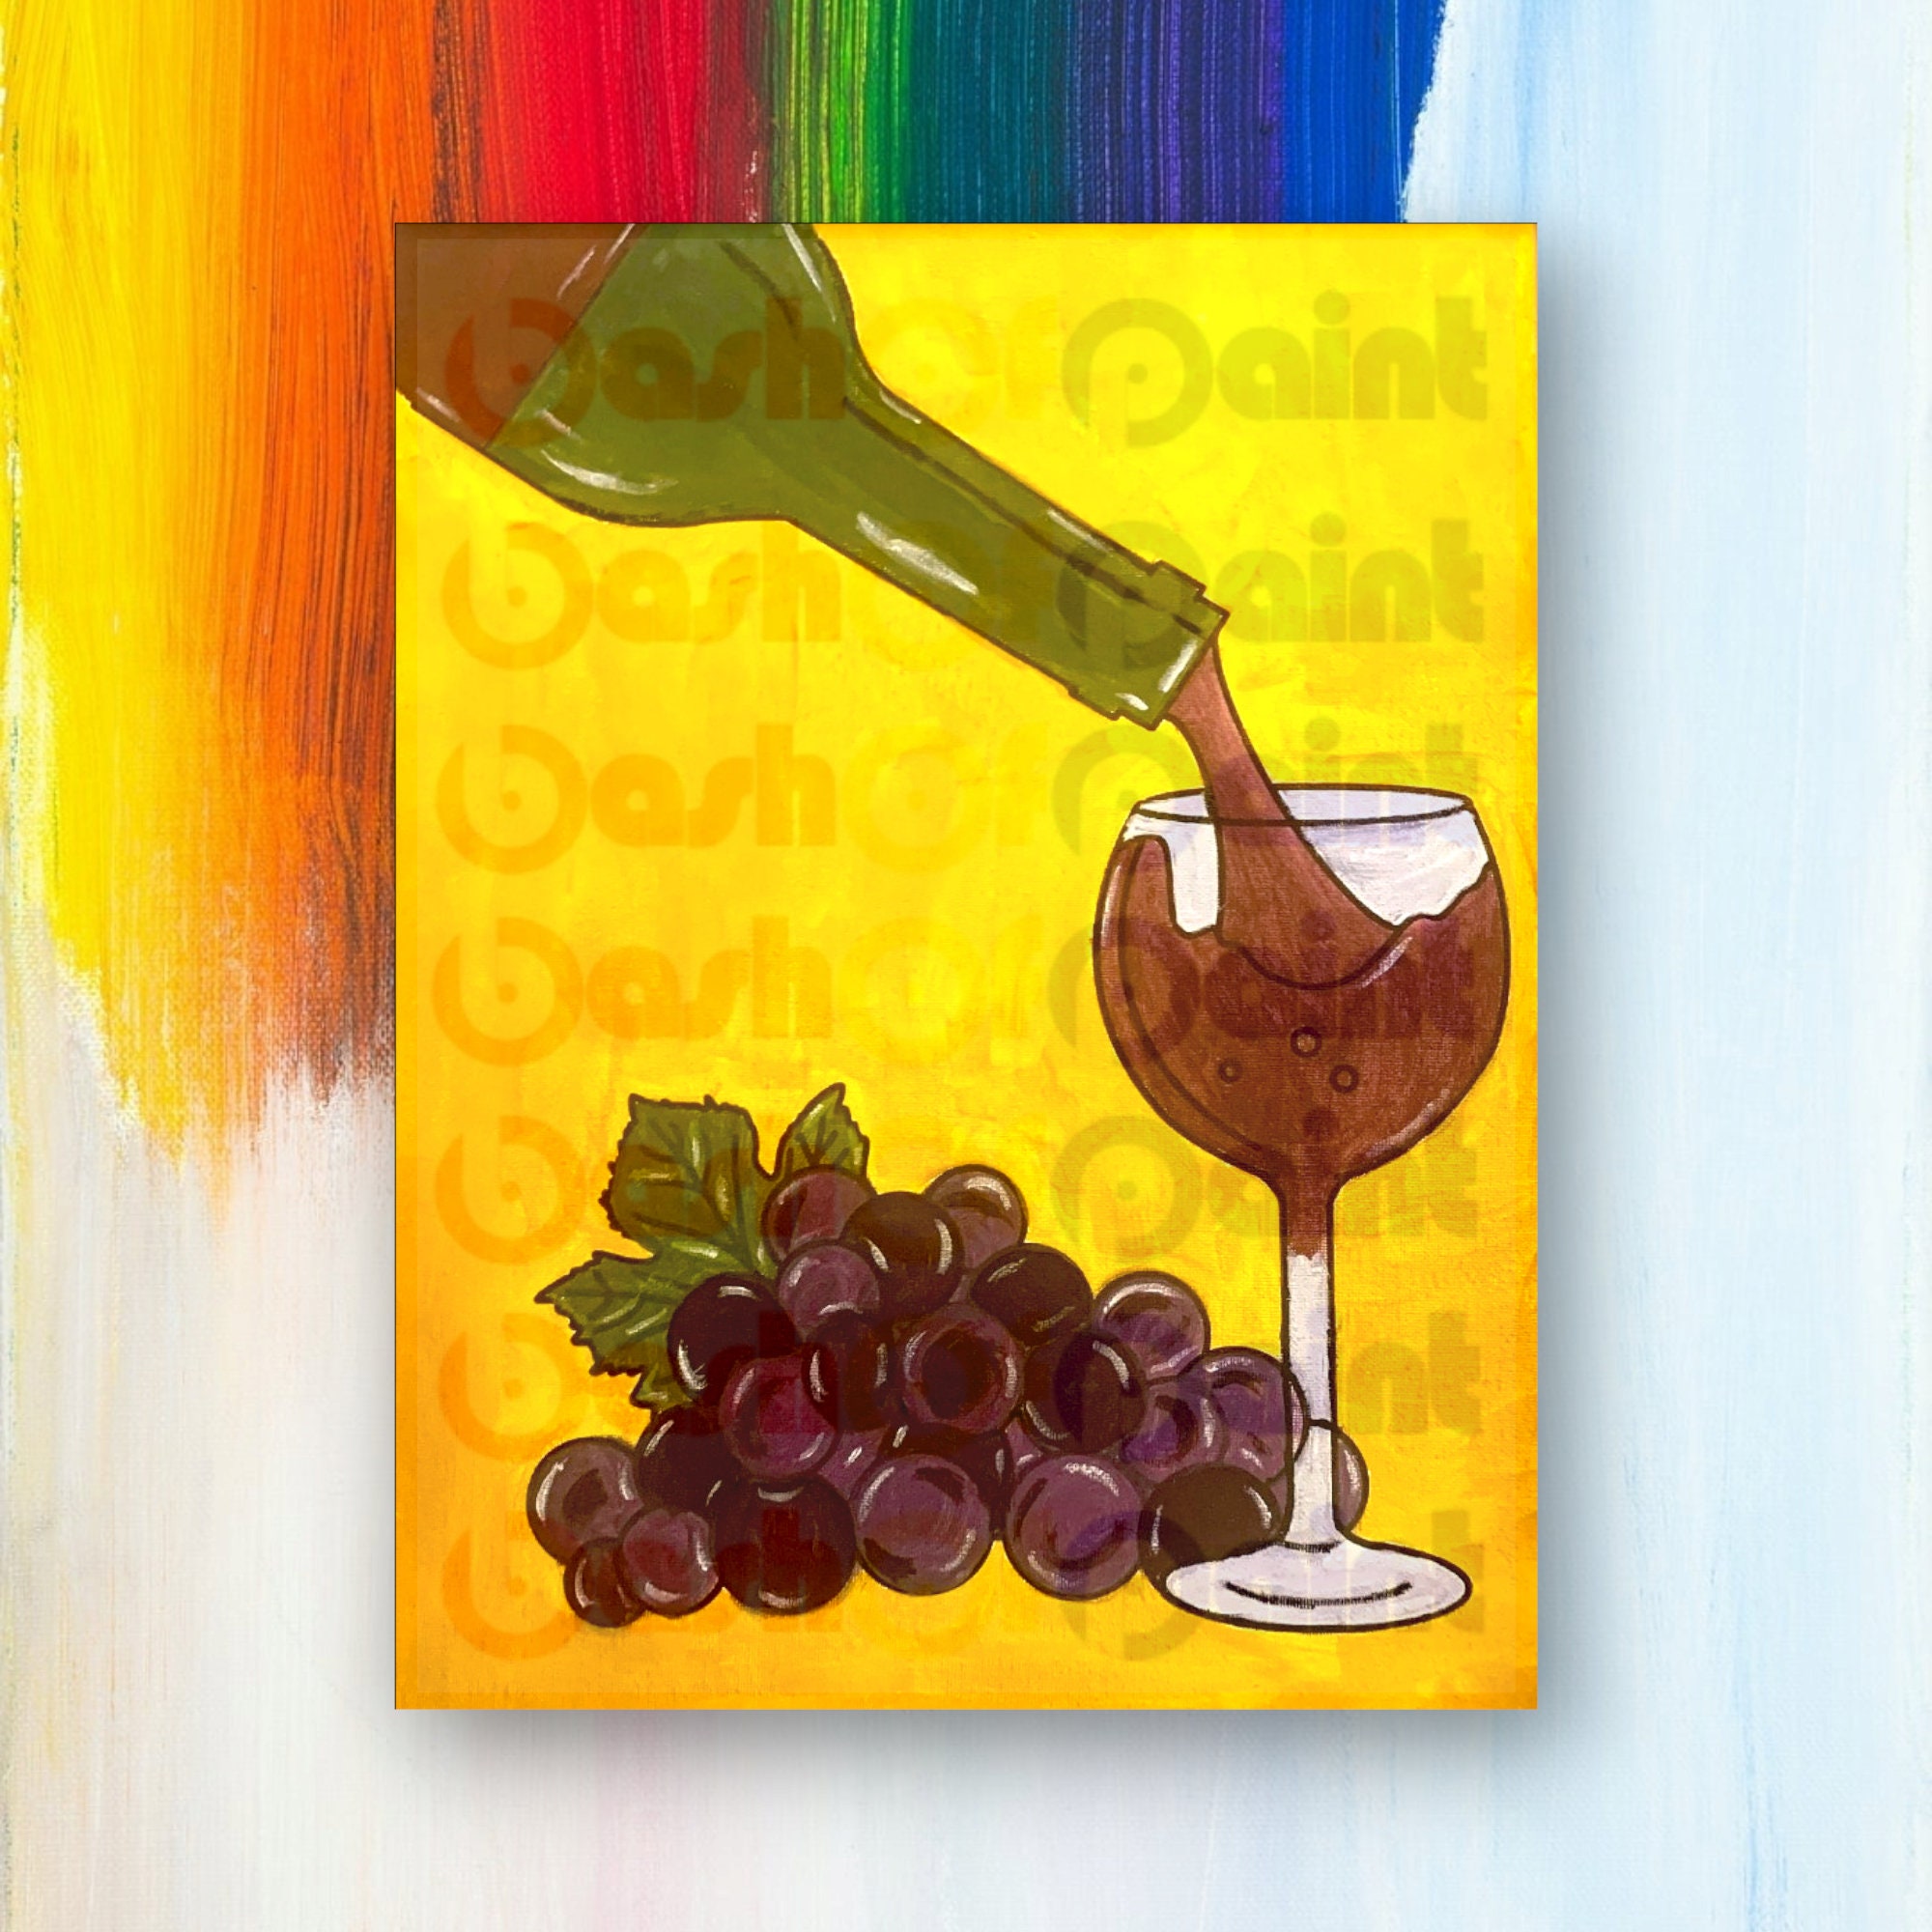 DIY Painting Set with Red Wine - 1 Canvas